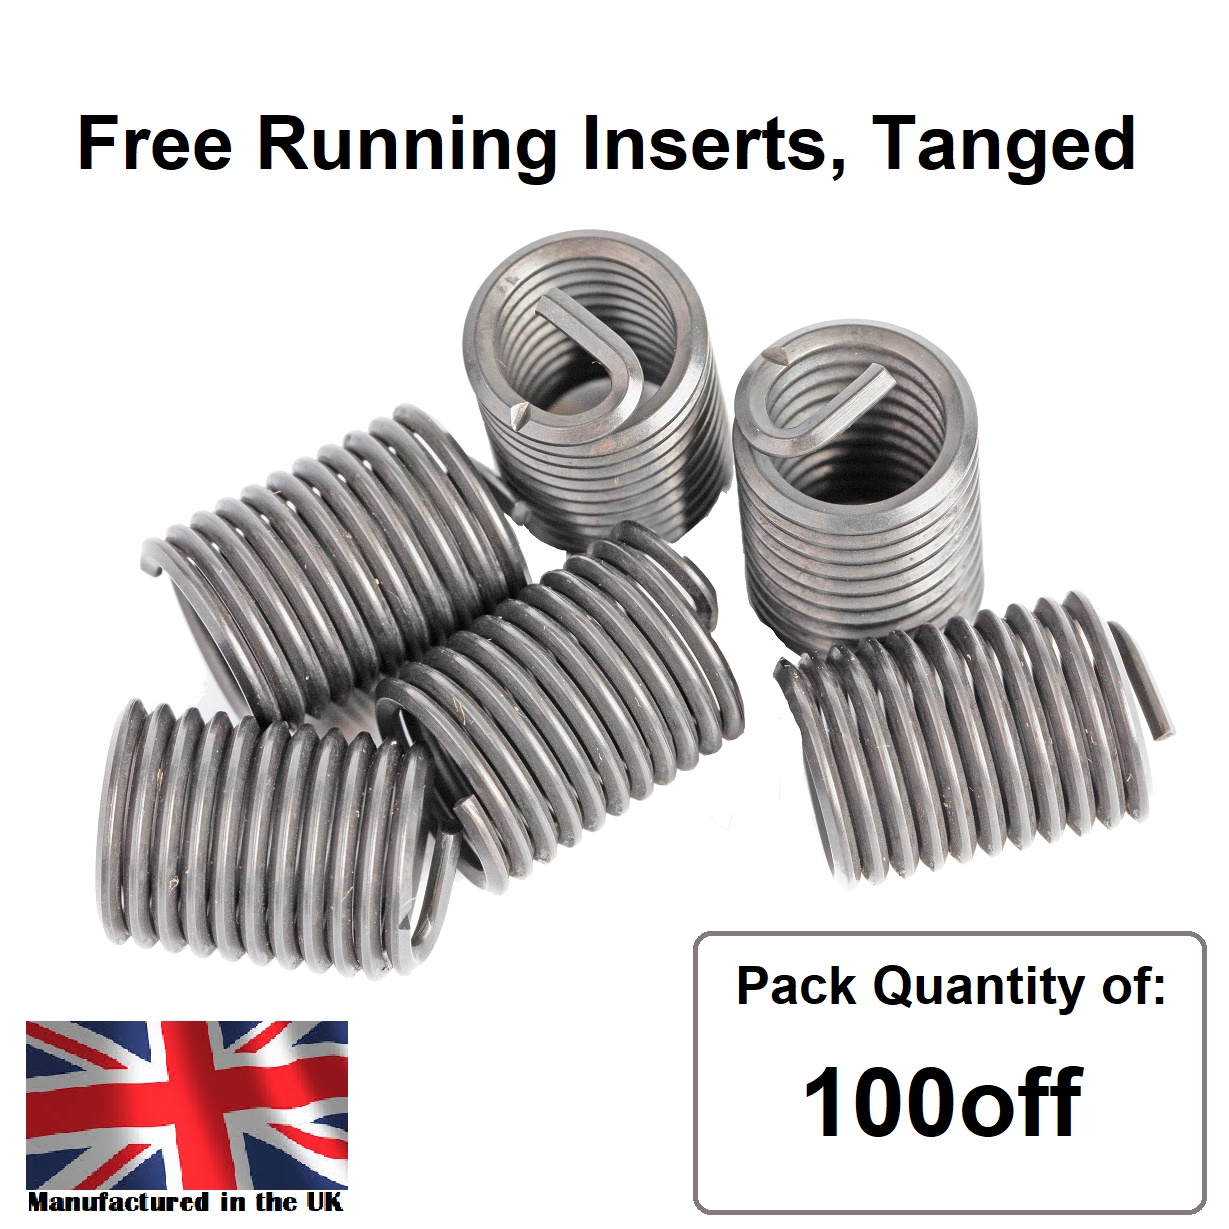 M2 x 0.4 x 1D Metric Coarse, Free Running, Tanged, Wire Thread Repair Insert, 304/A2 Stainless (Pack 100)